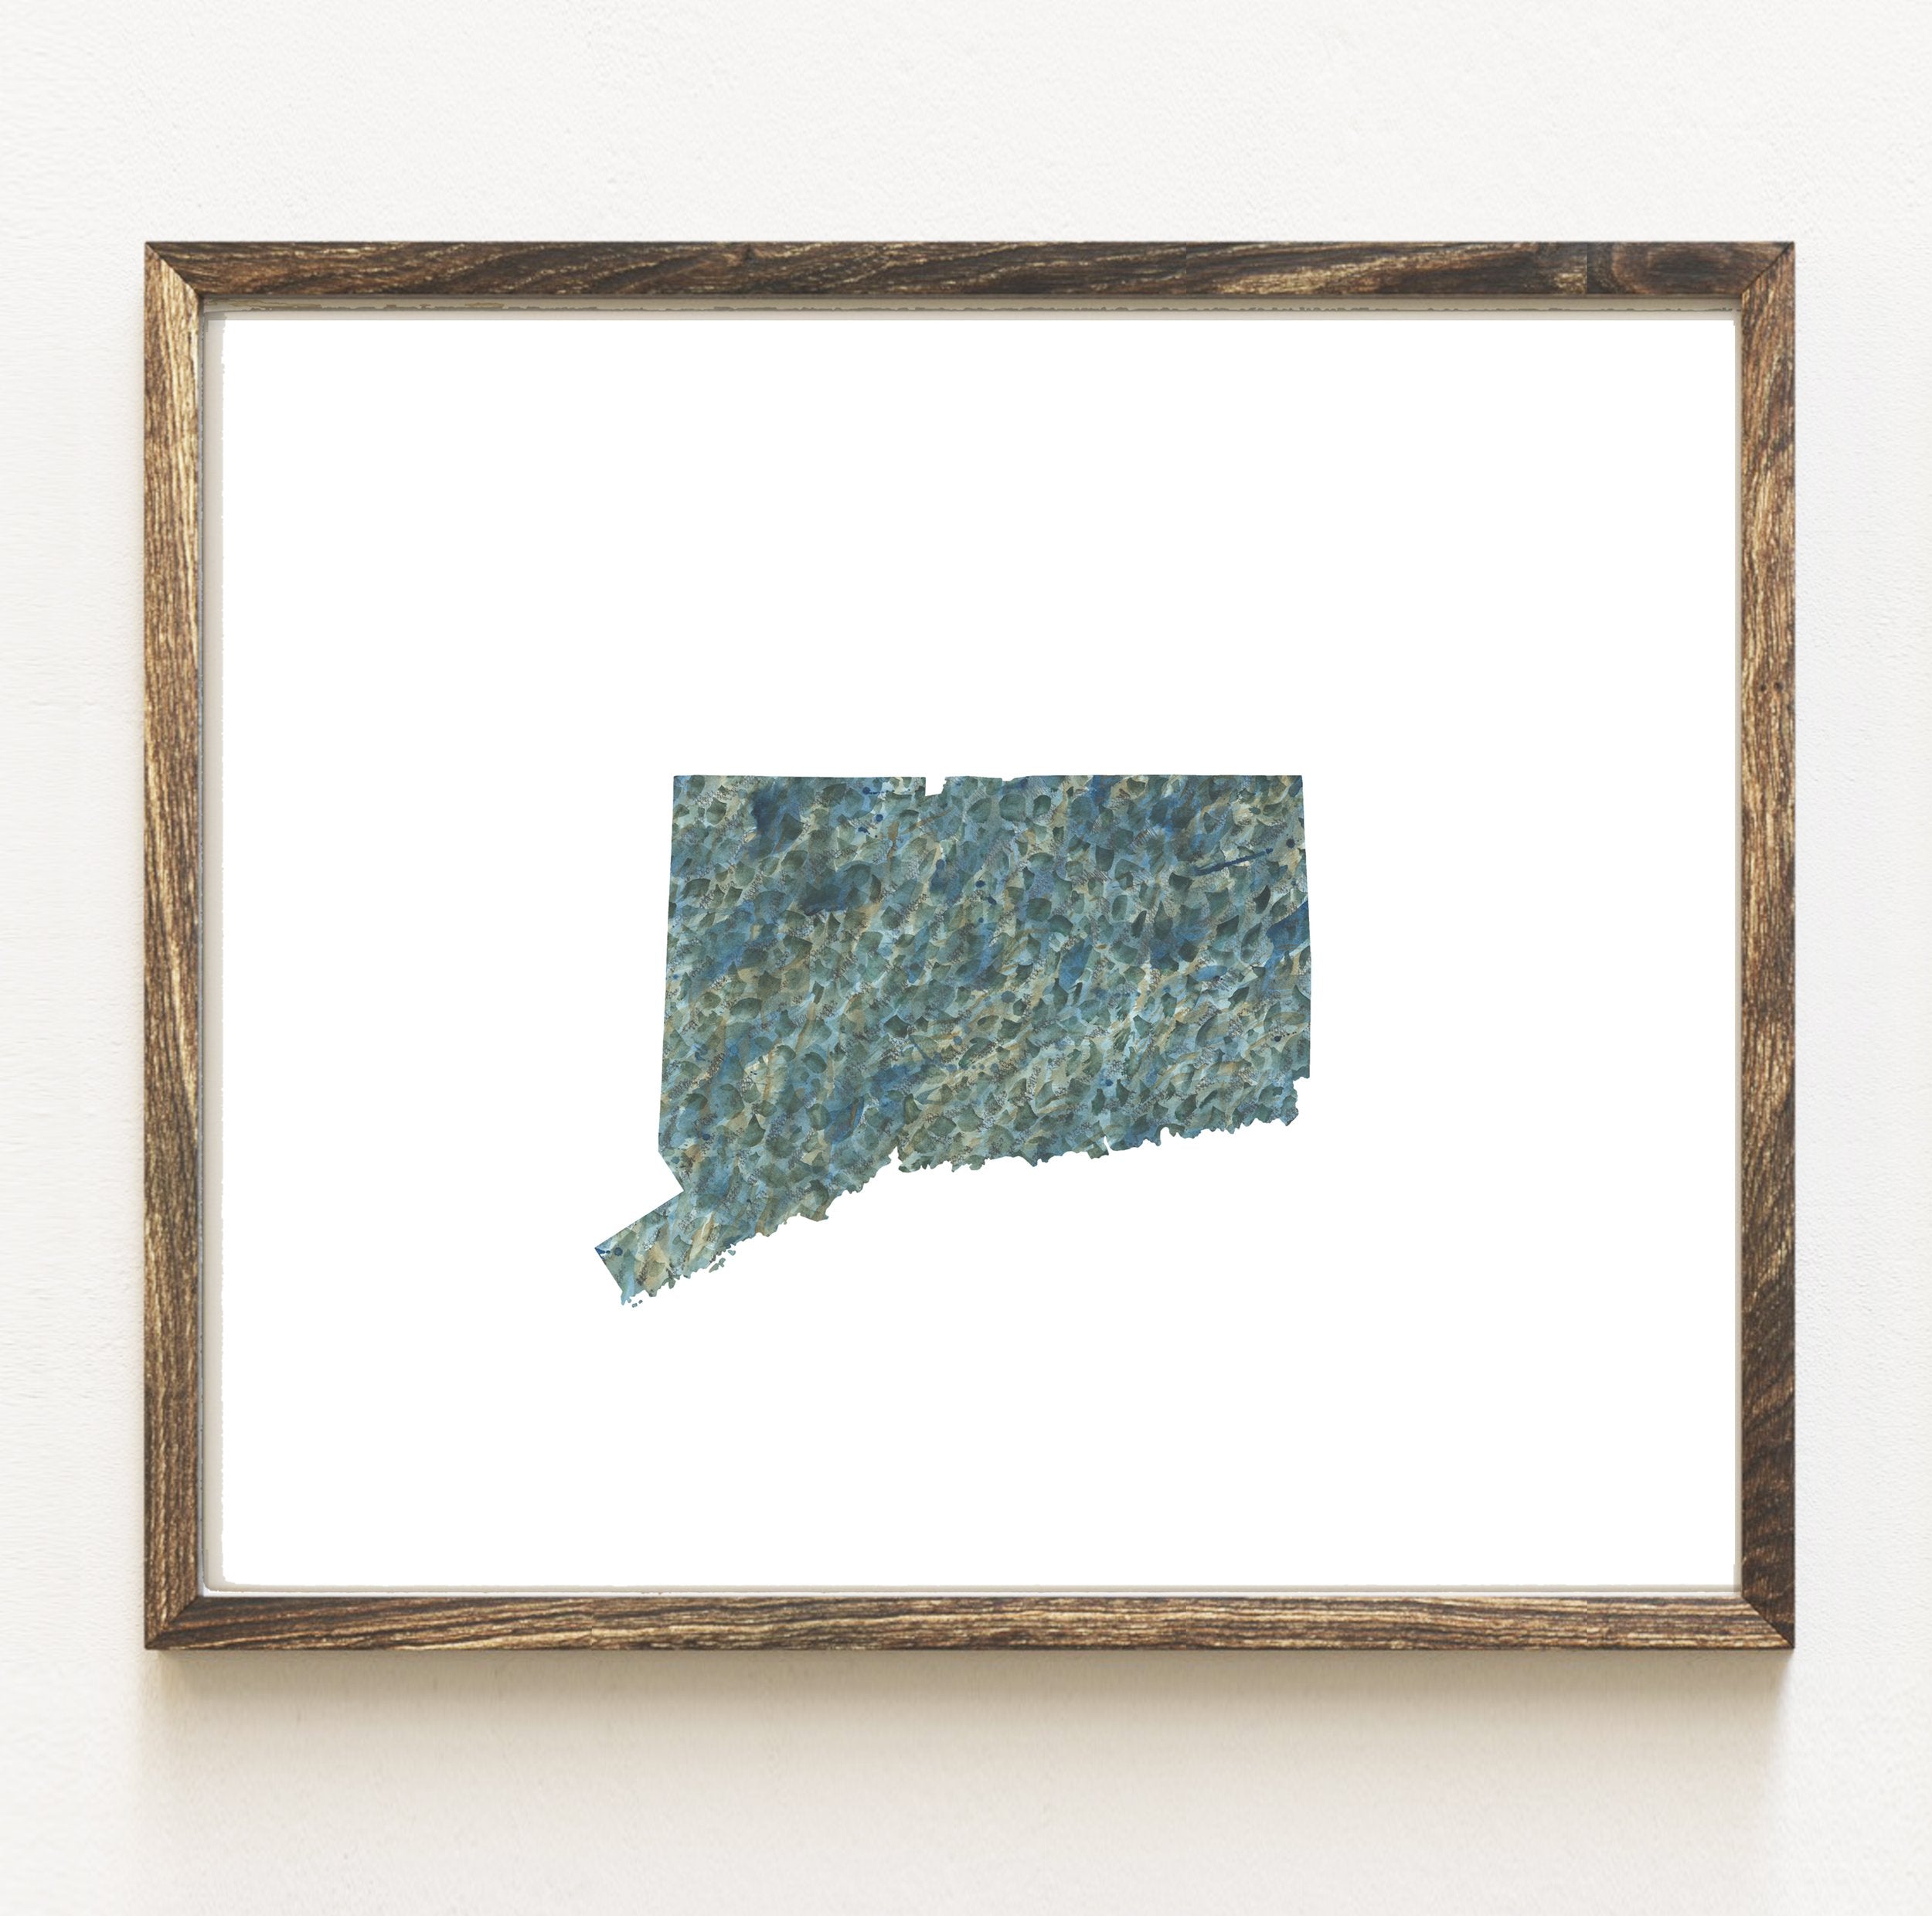 CONNECTICUT State Map: PRINT